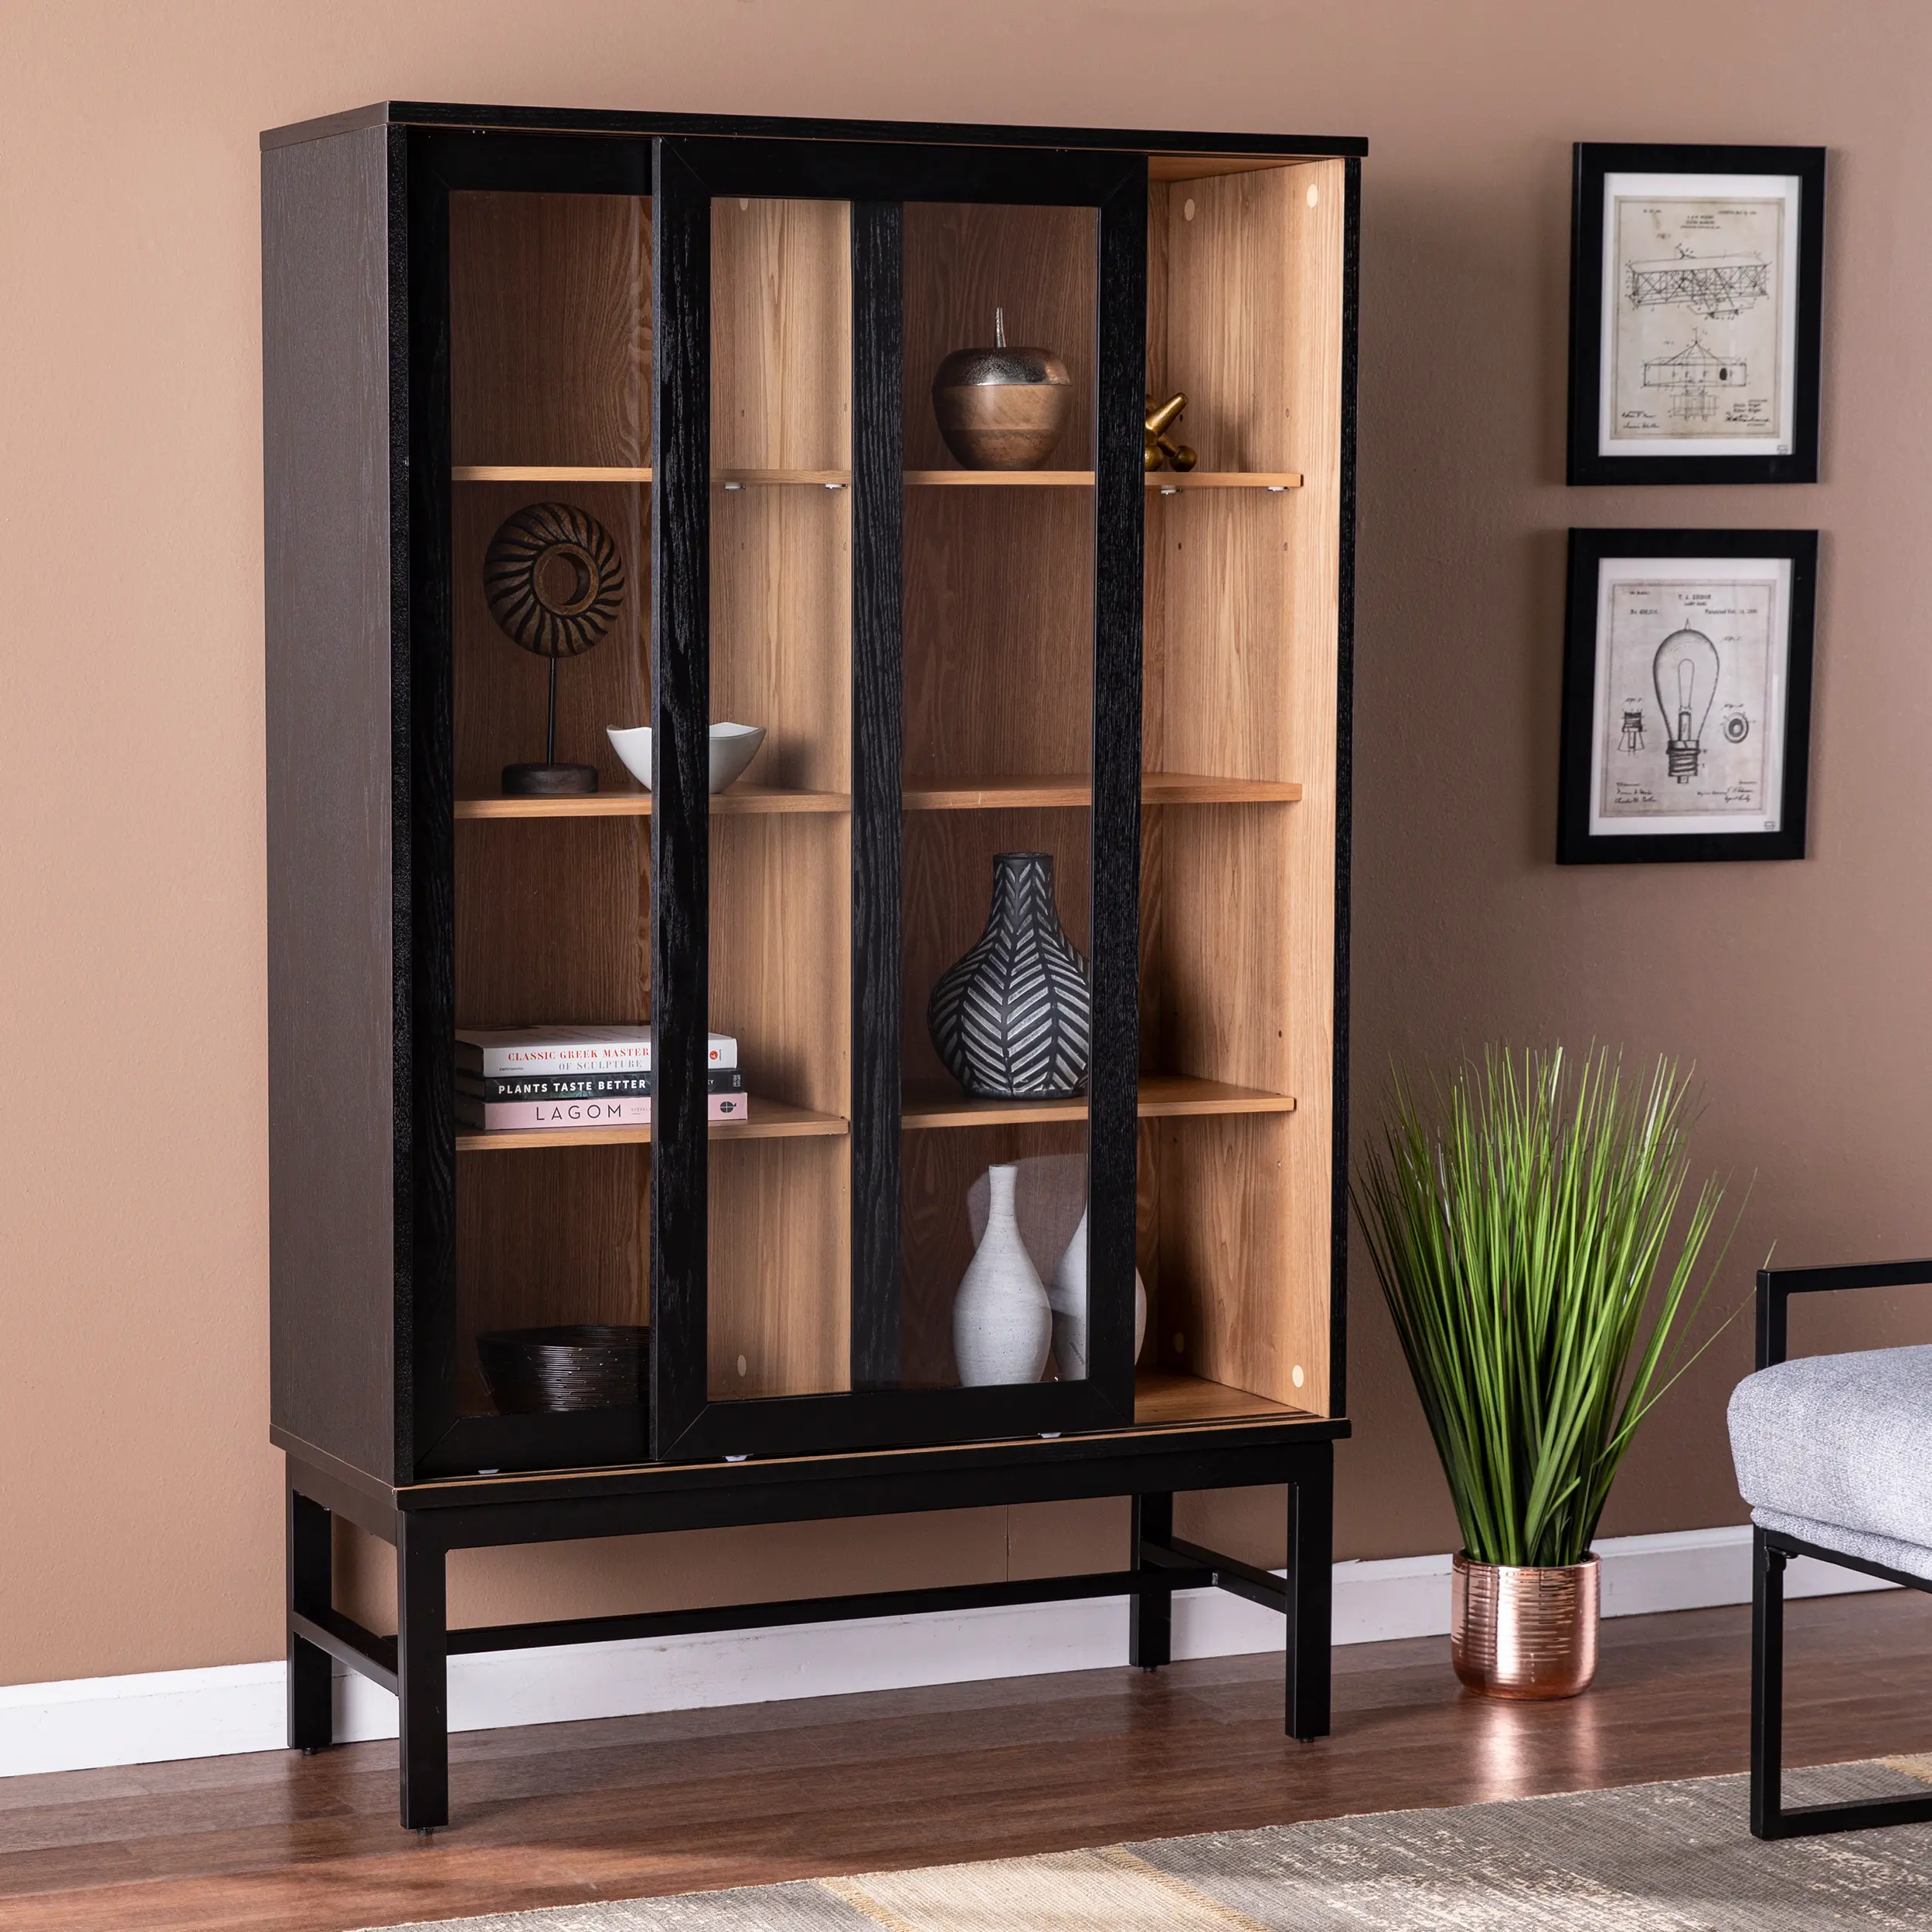 Hearzly Black Display Cabinet